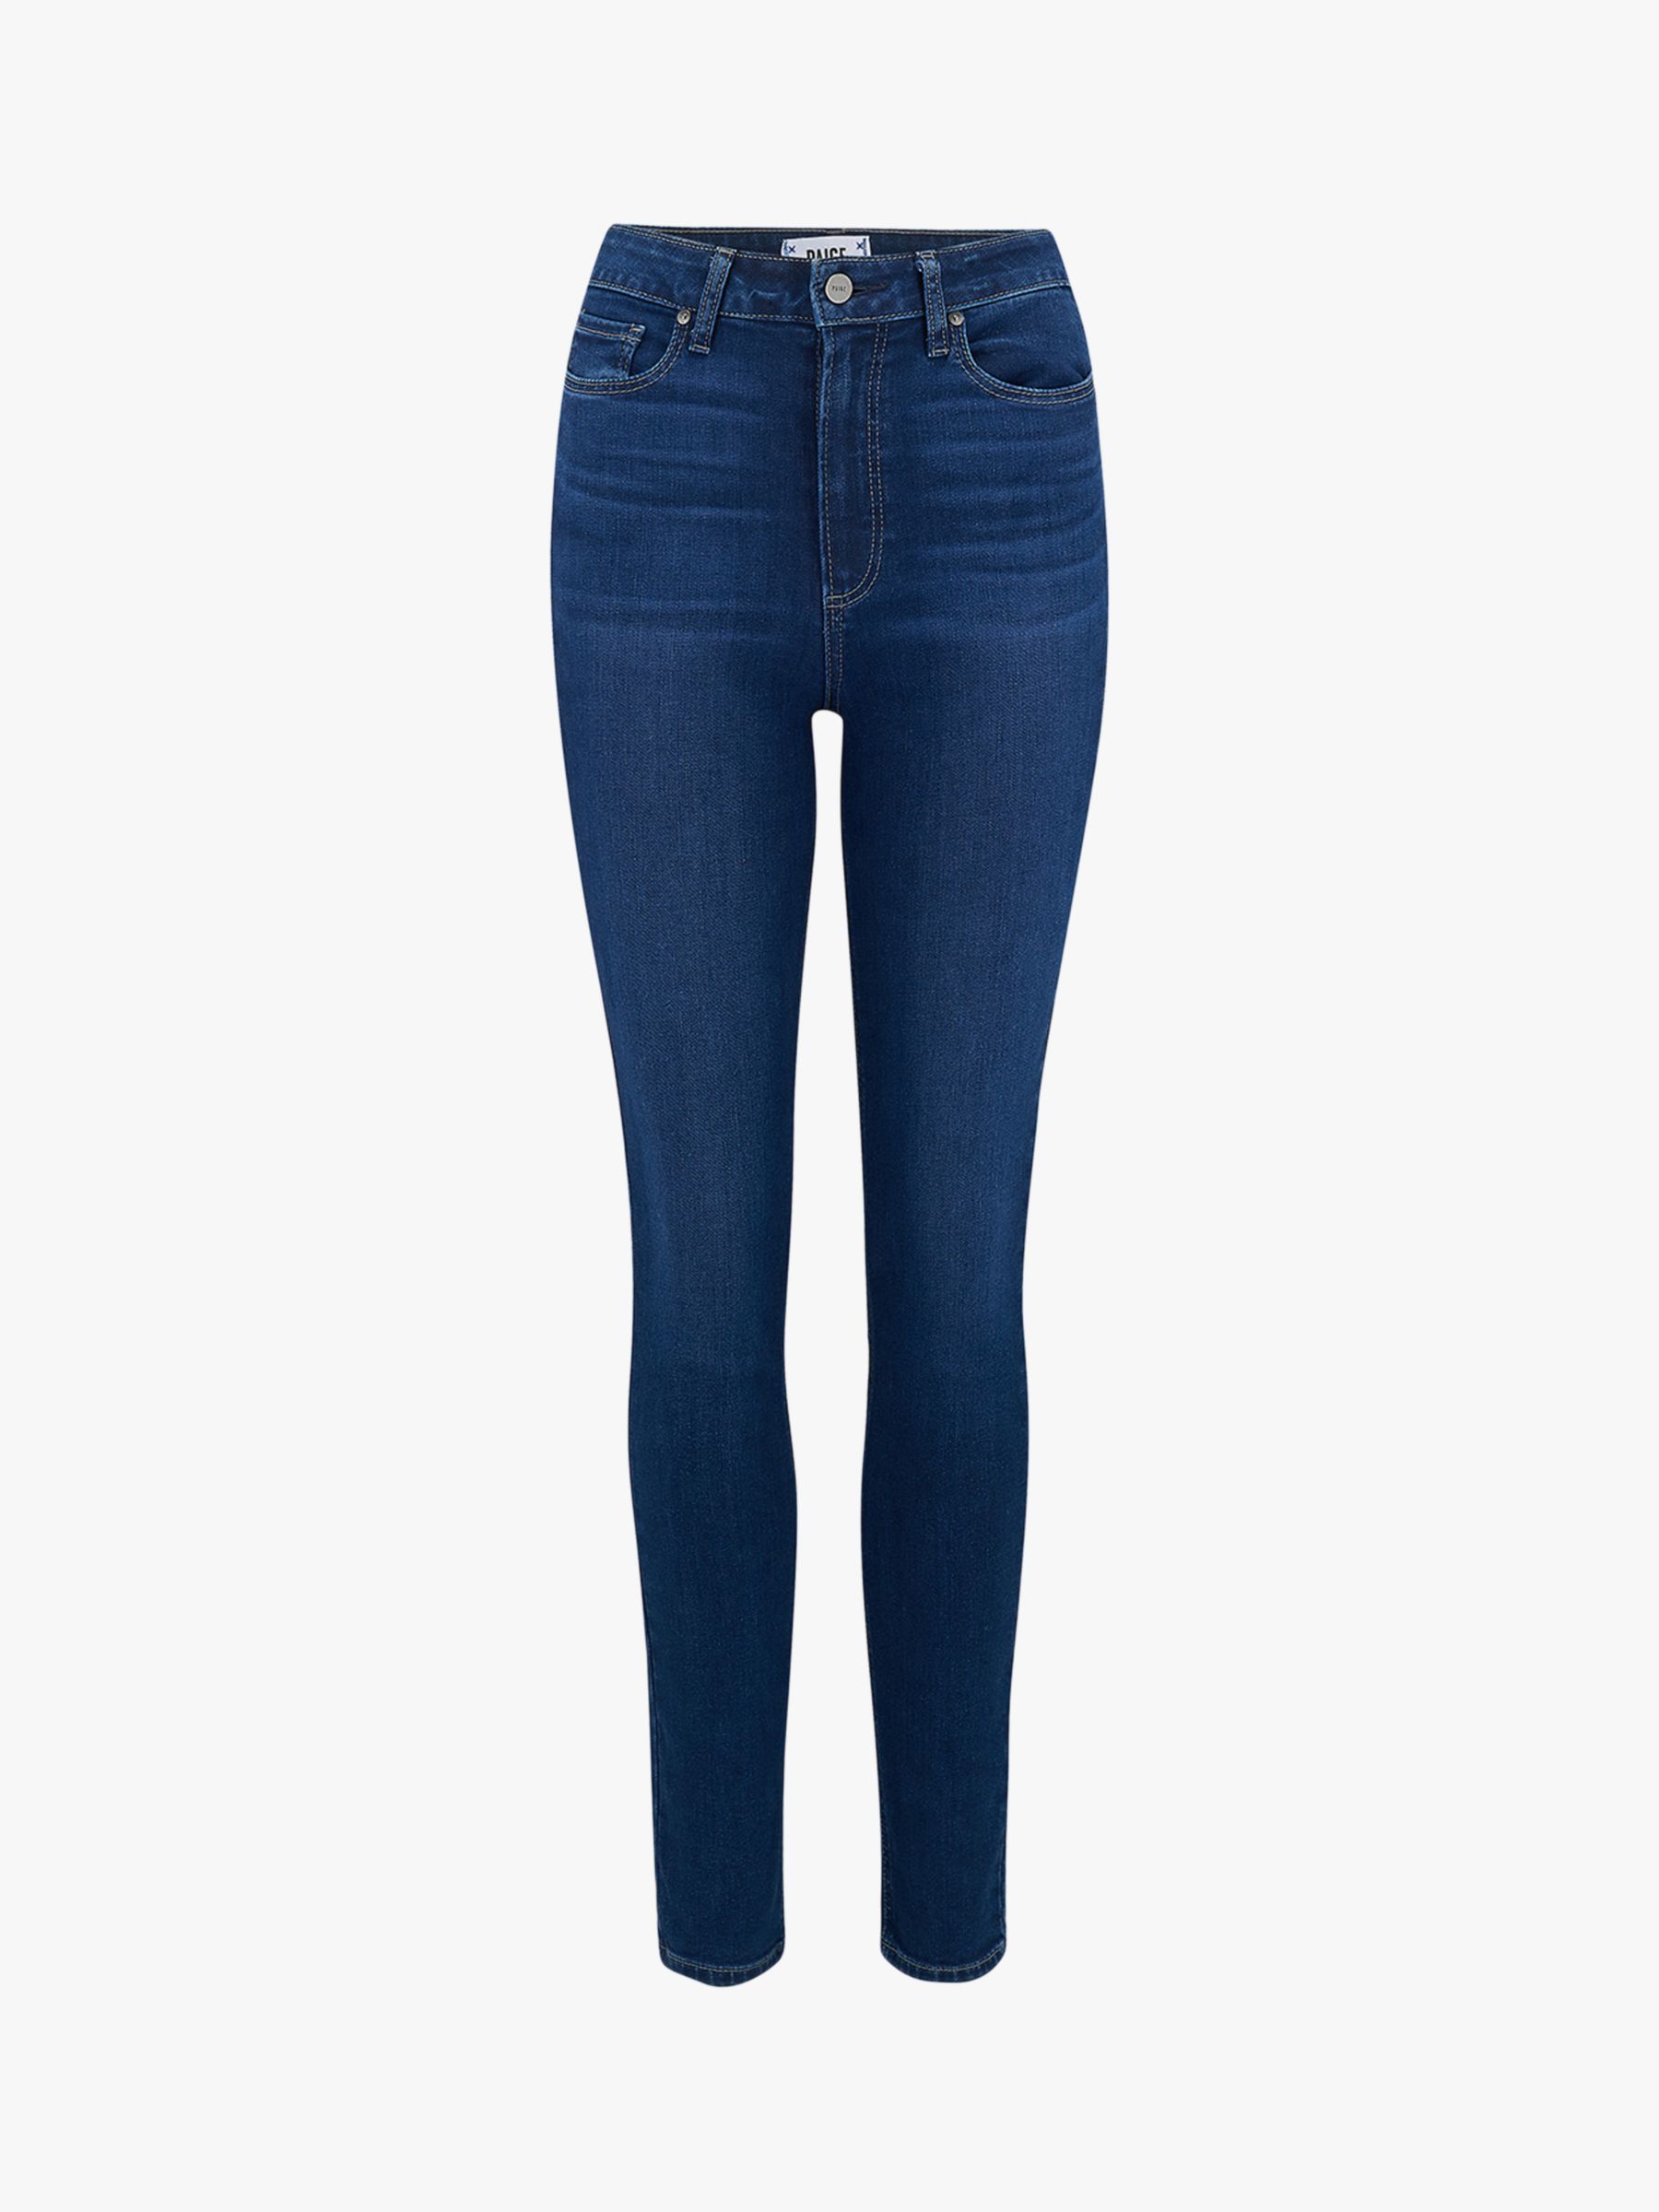 PAIGE Margot High Rise Ultra Skinny Jeans, Brentwood Mid Wash, 24